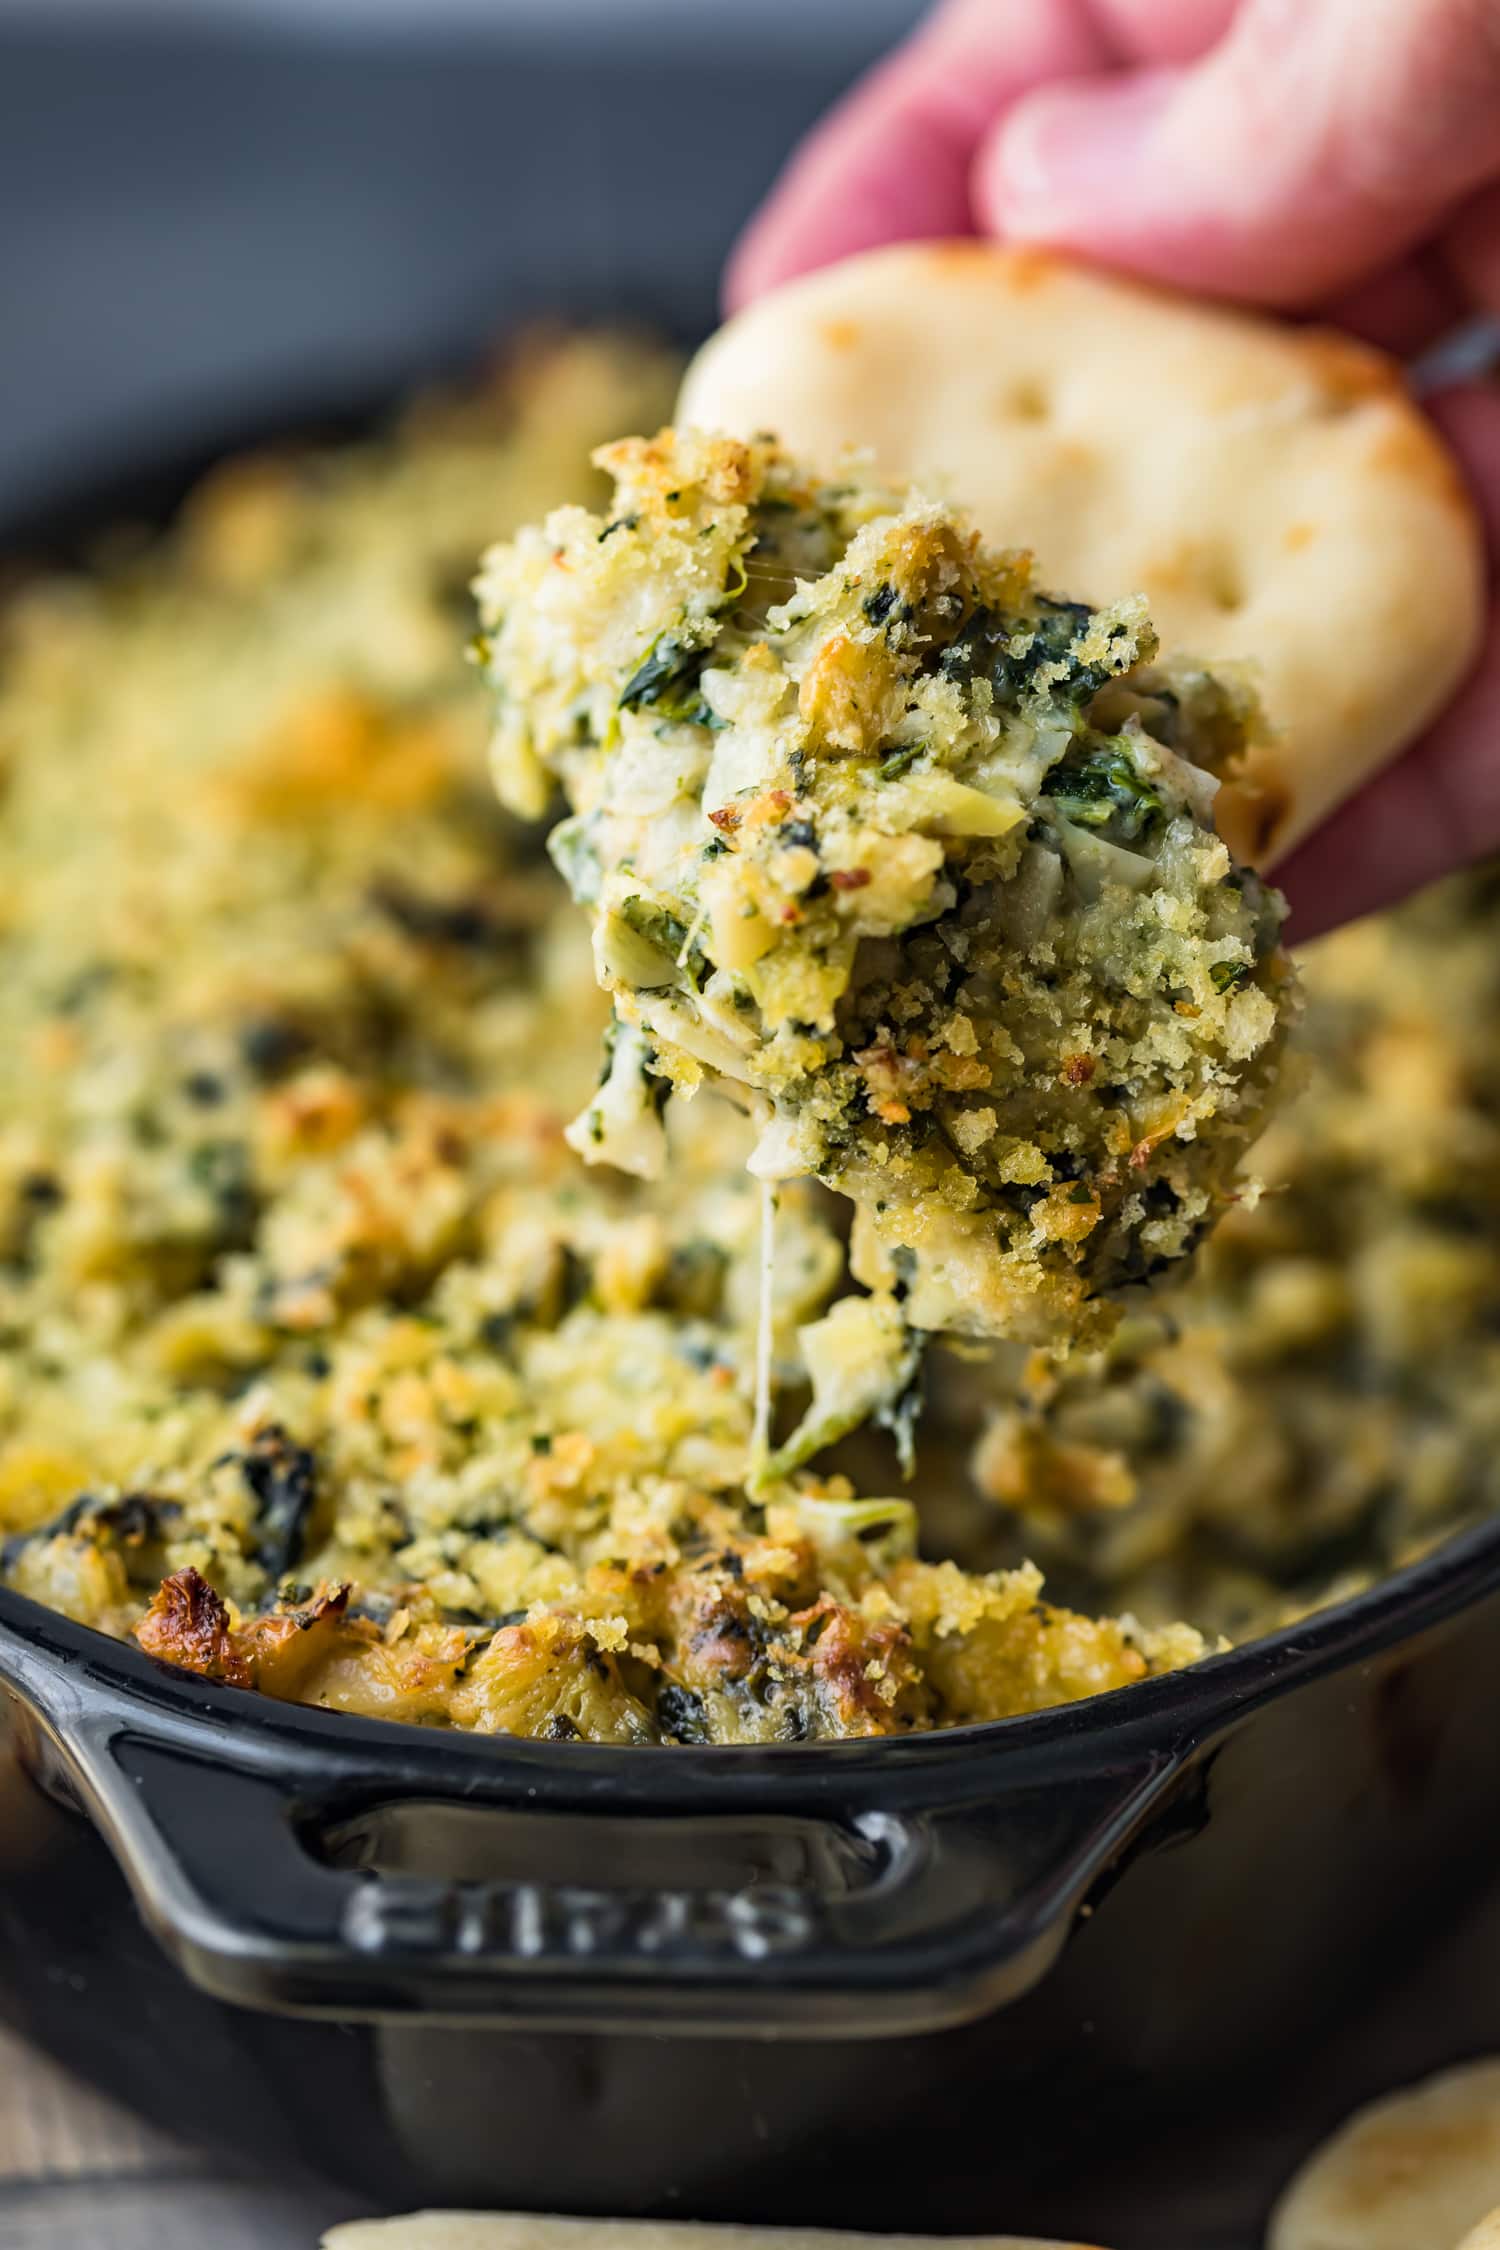 A person is dipping a cracker into a bowl of baked spinach and artichoke dip.